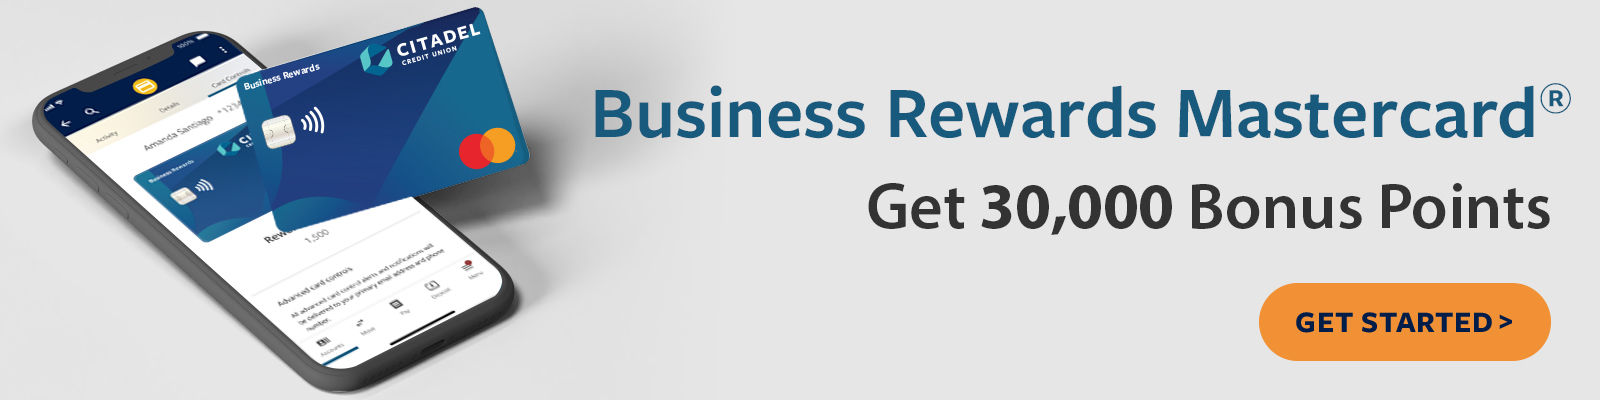 Open a Business Rewards Mastercard and get 30,000 bonus points